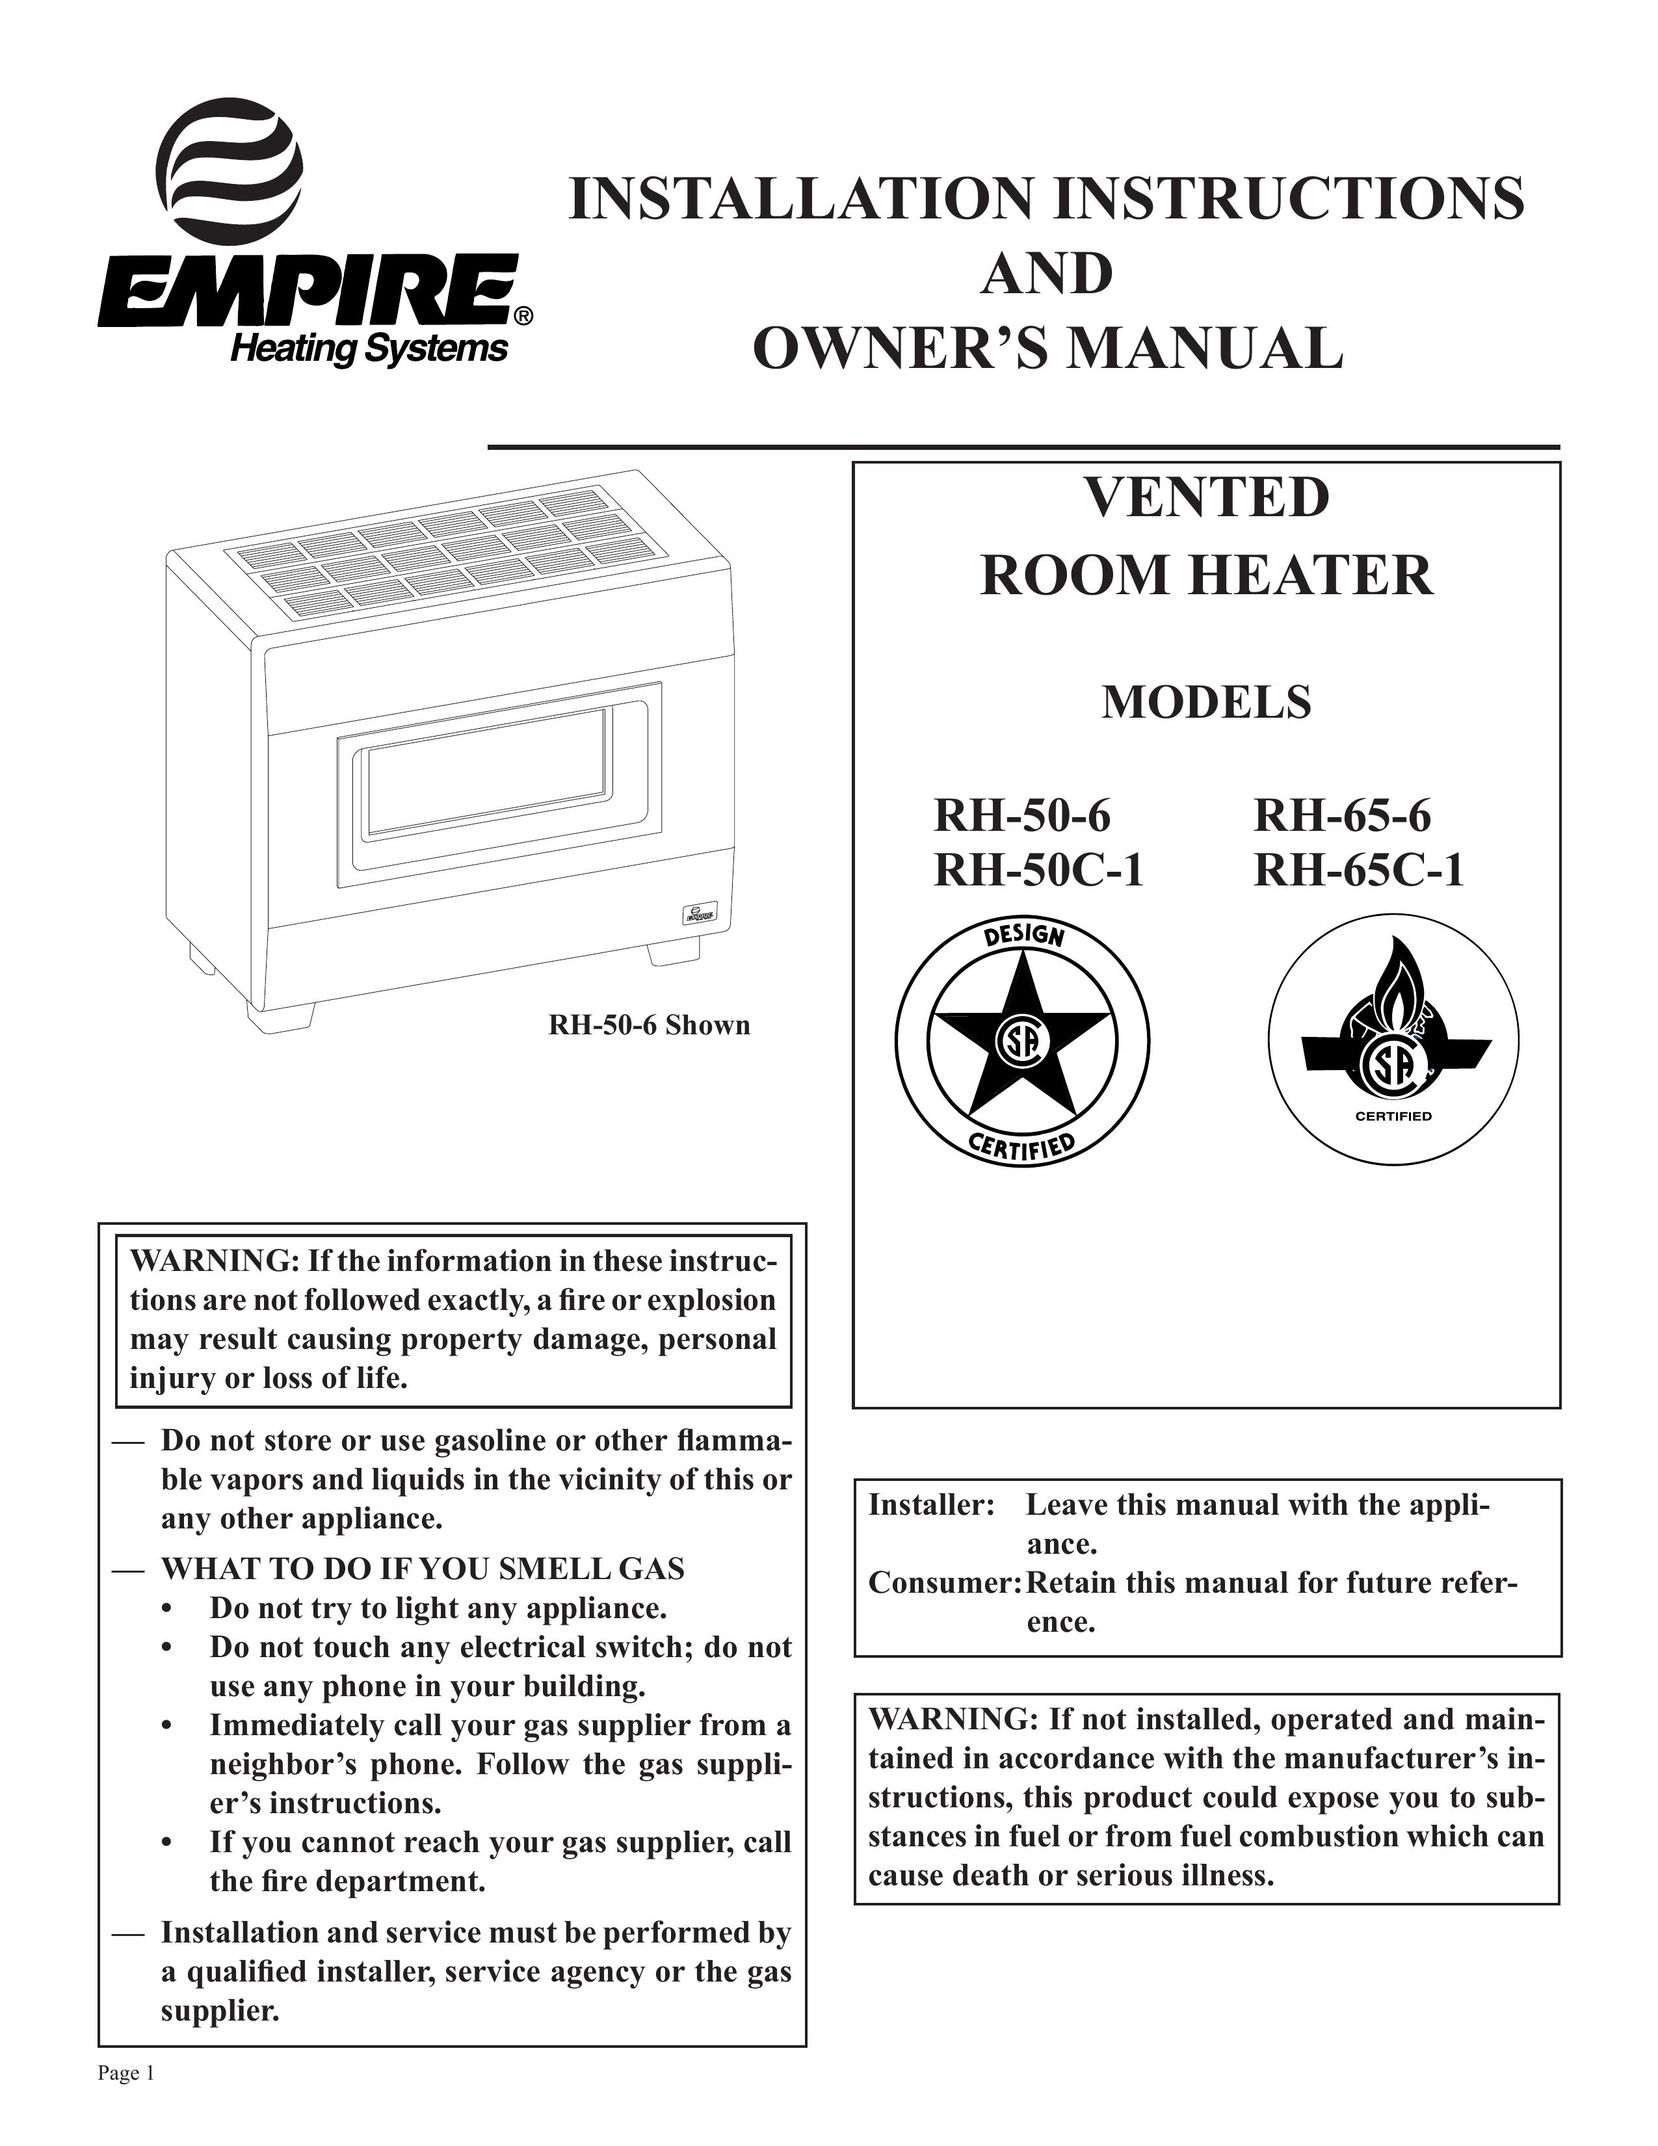 Empire Comfort Systems RH50C-1 Electric Heater User Manual